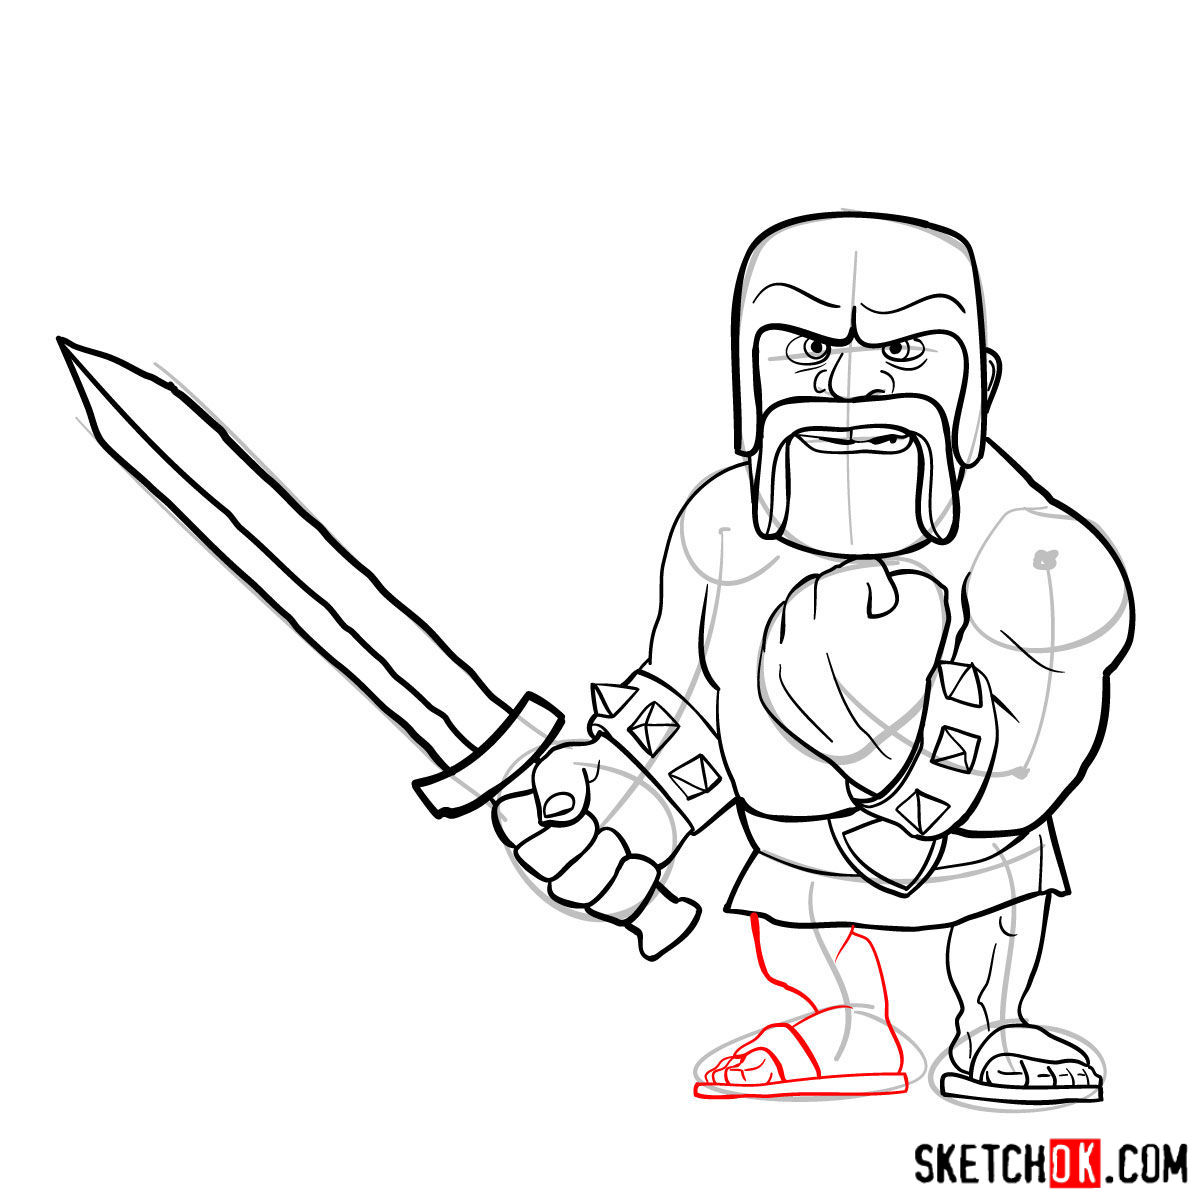 How to draw Barbarian from Clash of Clans - step 11